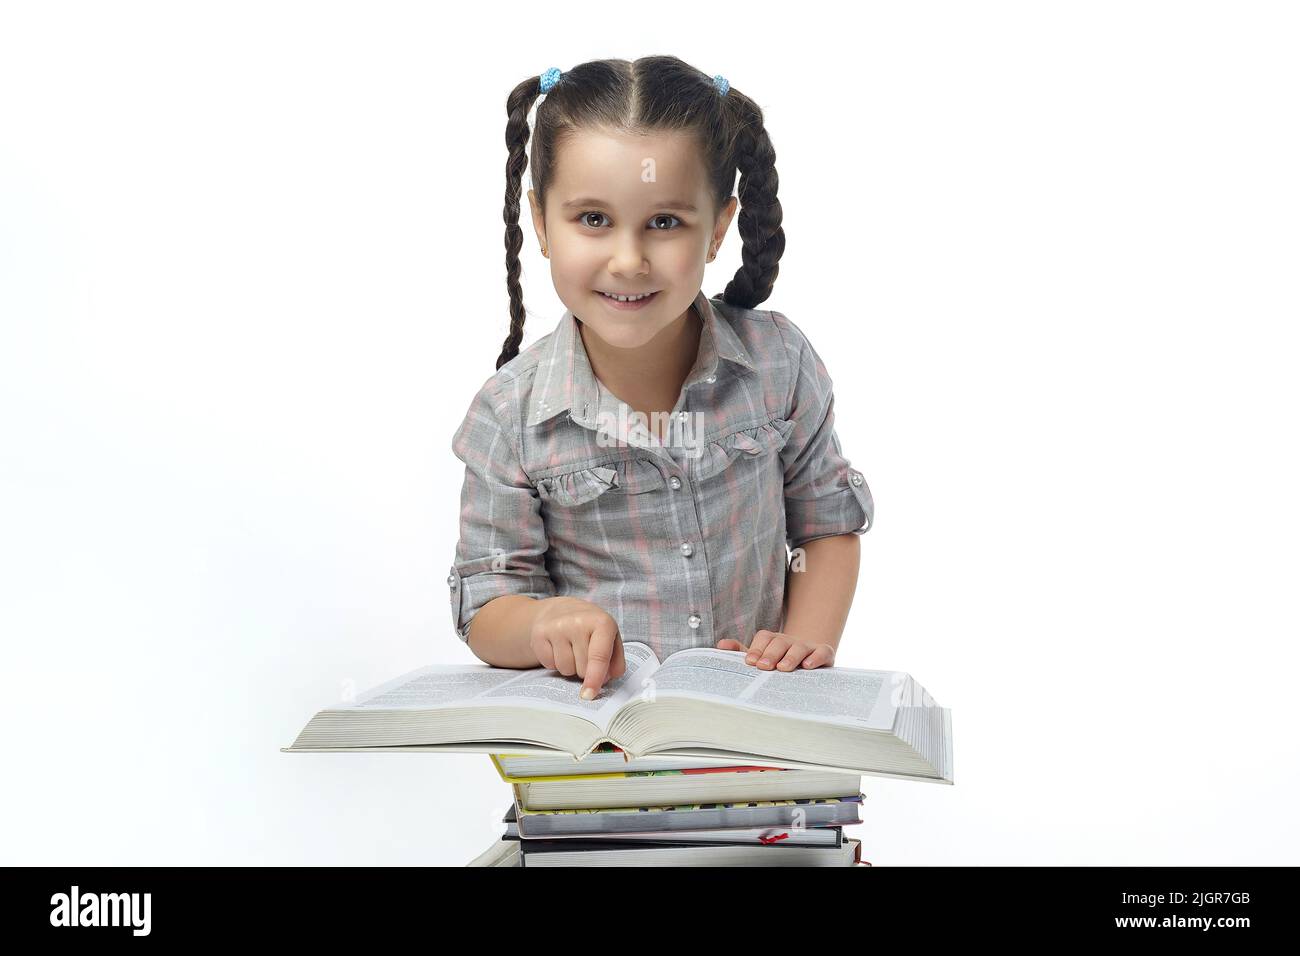 charming little girl with braided pigtails sits in front of a large book and looks into the camera. Stock Photo